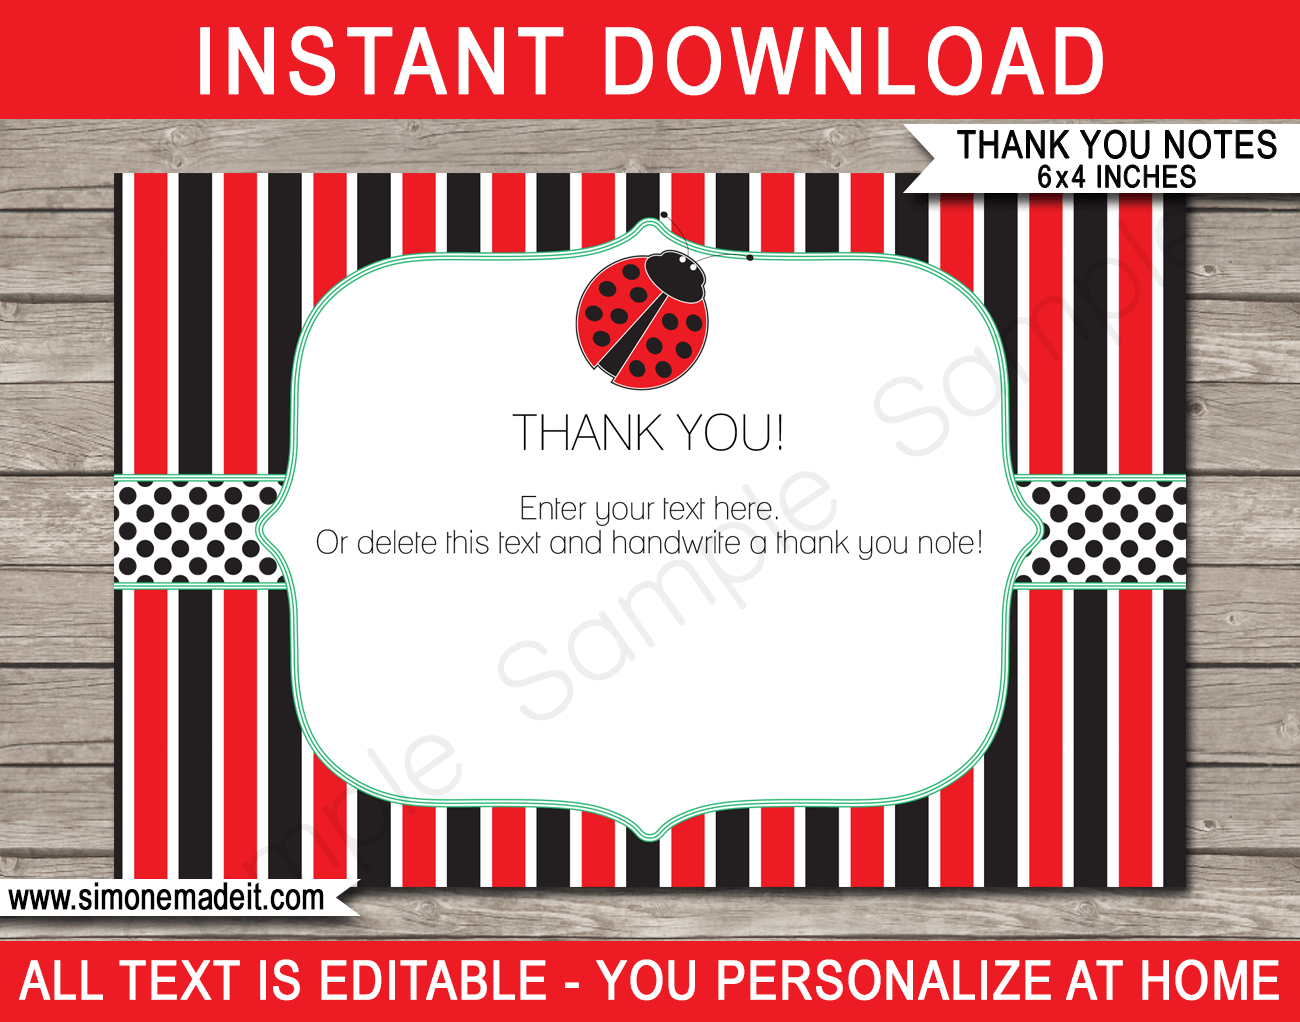 Printable Ladybug Party Thank You Card Template - Favor Note Tags - Ladybird Birthday Party theme - Editable Text - Instant Download via simonemadeit.com